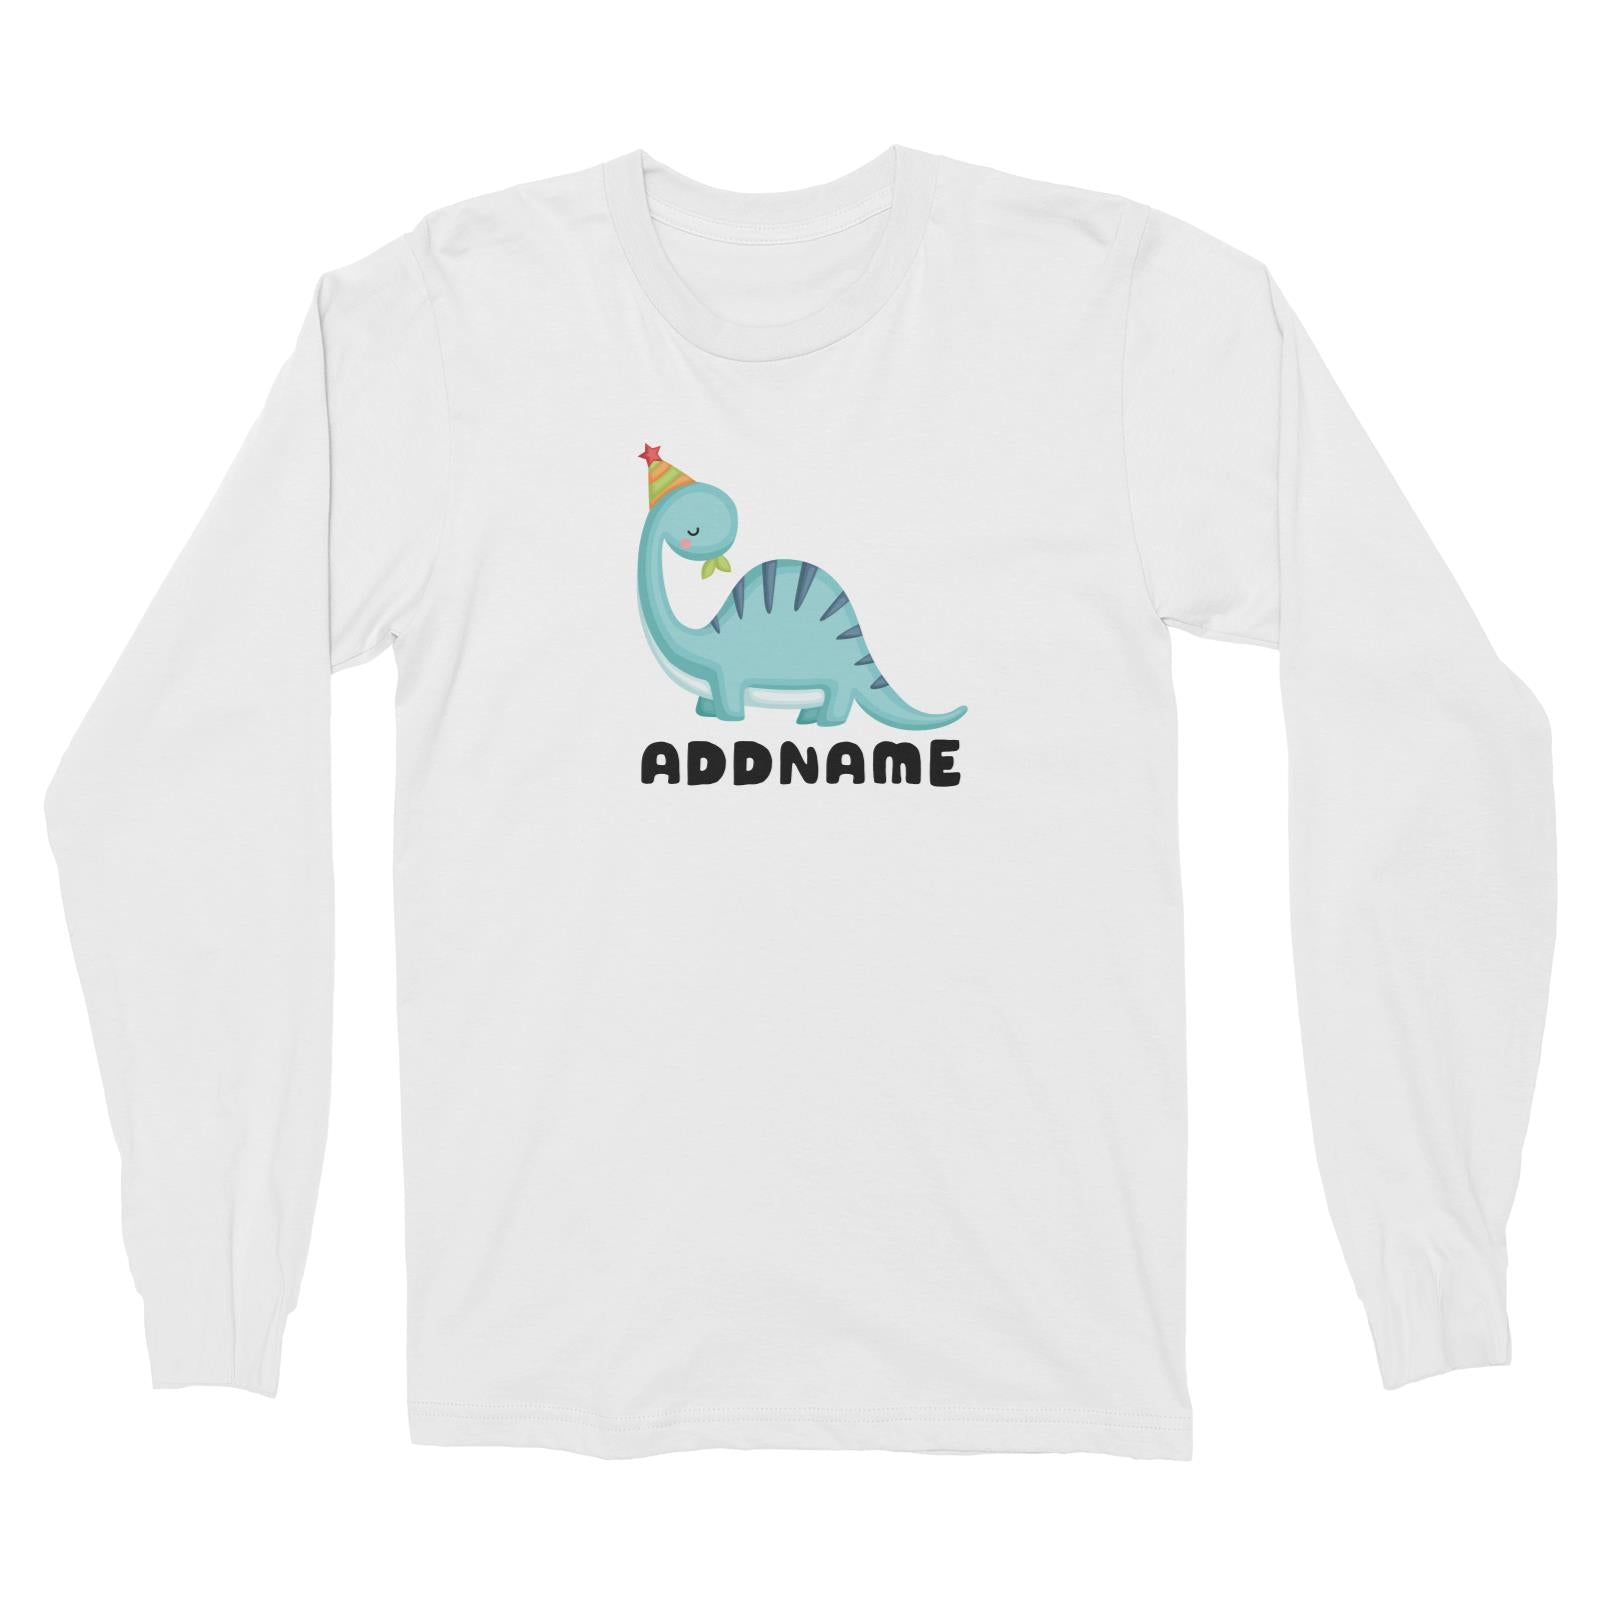 Birthday Dinosaur Happy Blue Long Neck With Party Hat Addname Long Sleeve Unisex T-Shirt